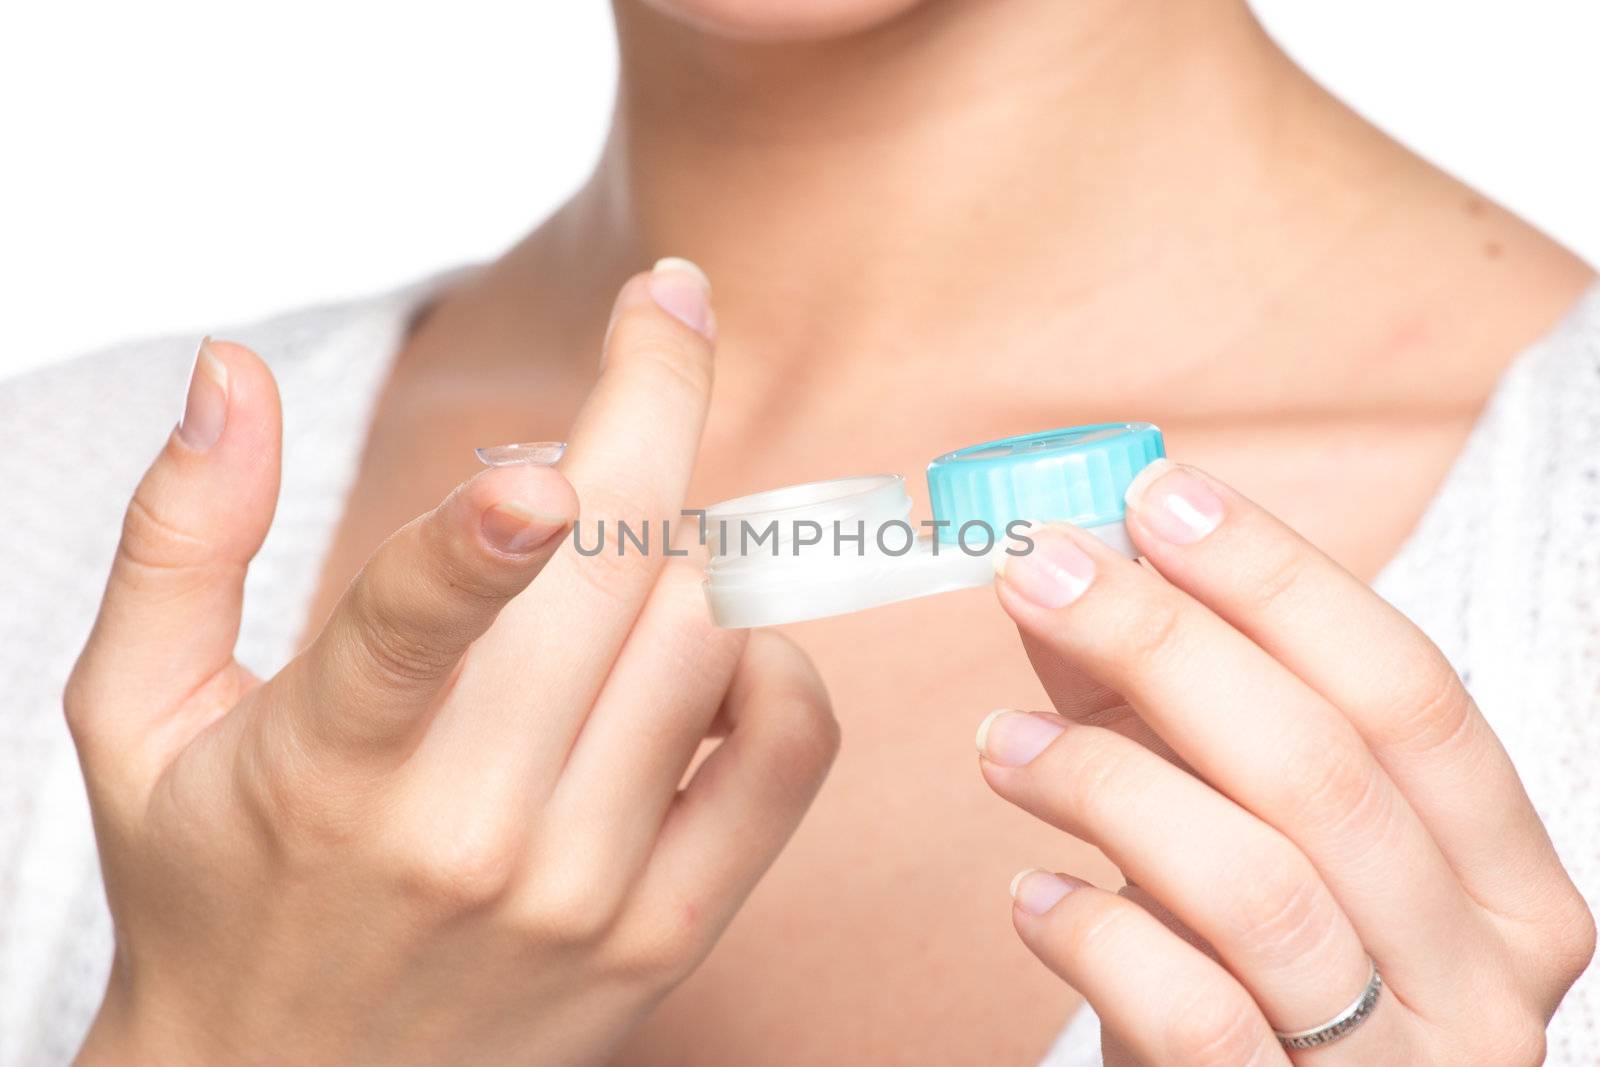 Contact lenses box in womans hand by gsdonlin